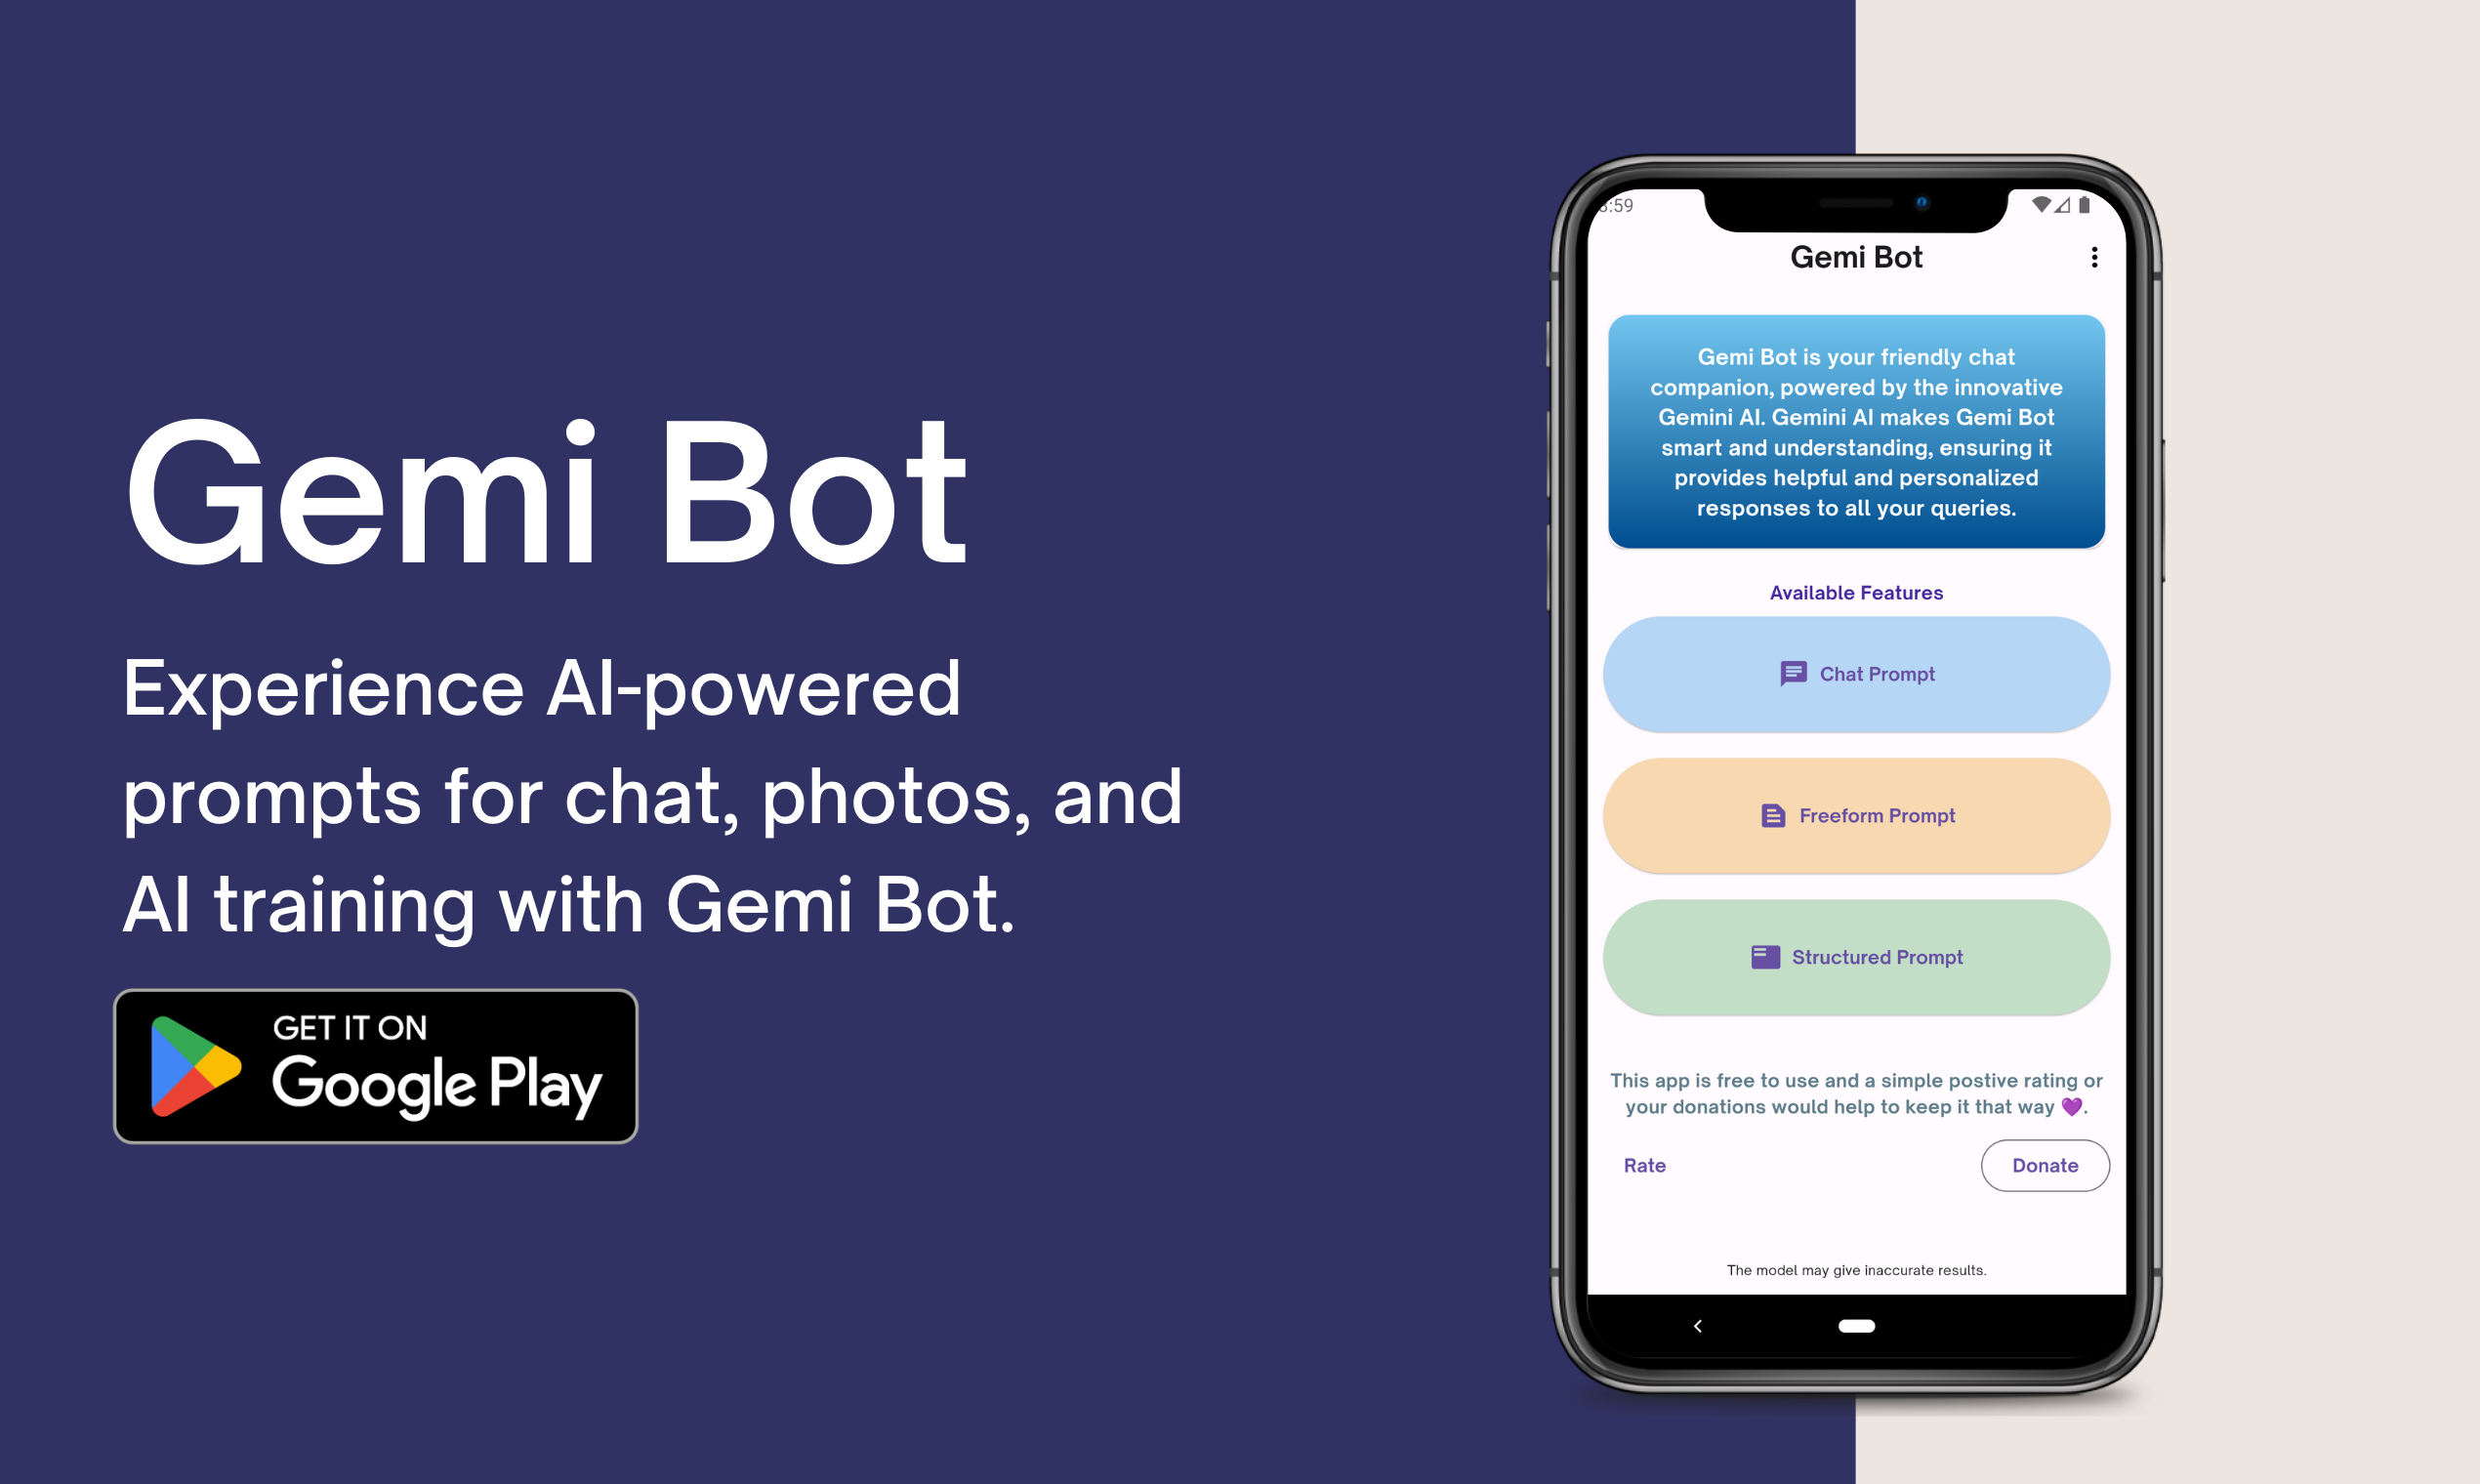 gemi-bot - Experience AI prompts for chat, photos & model training